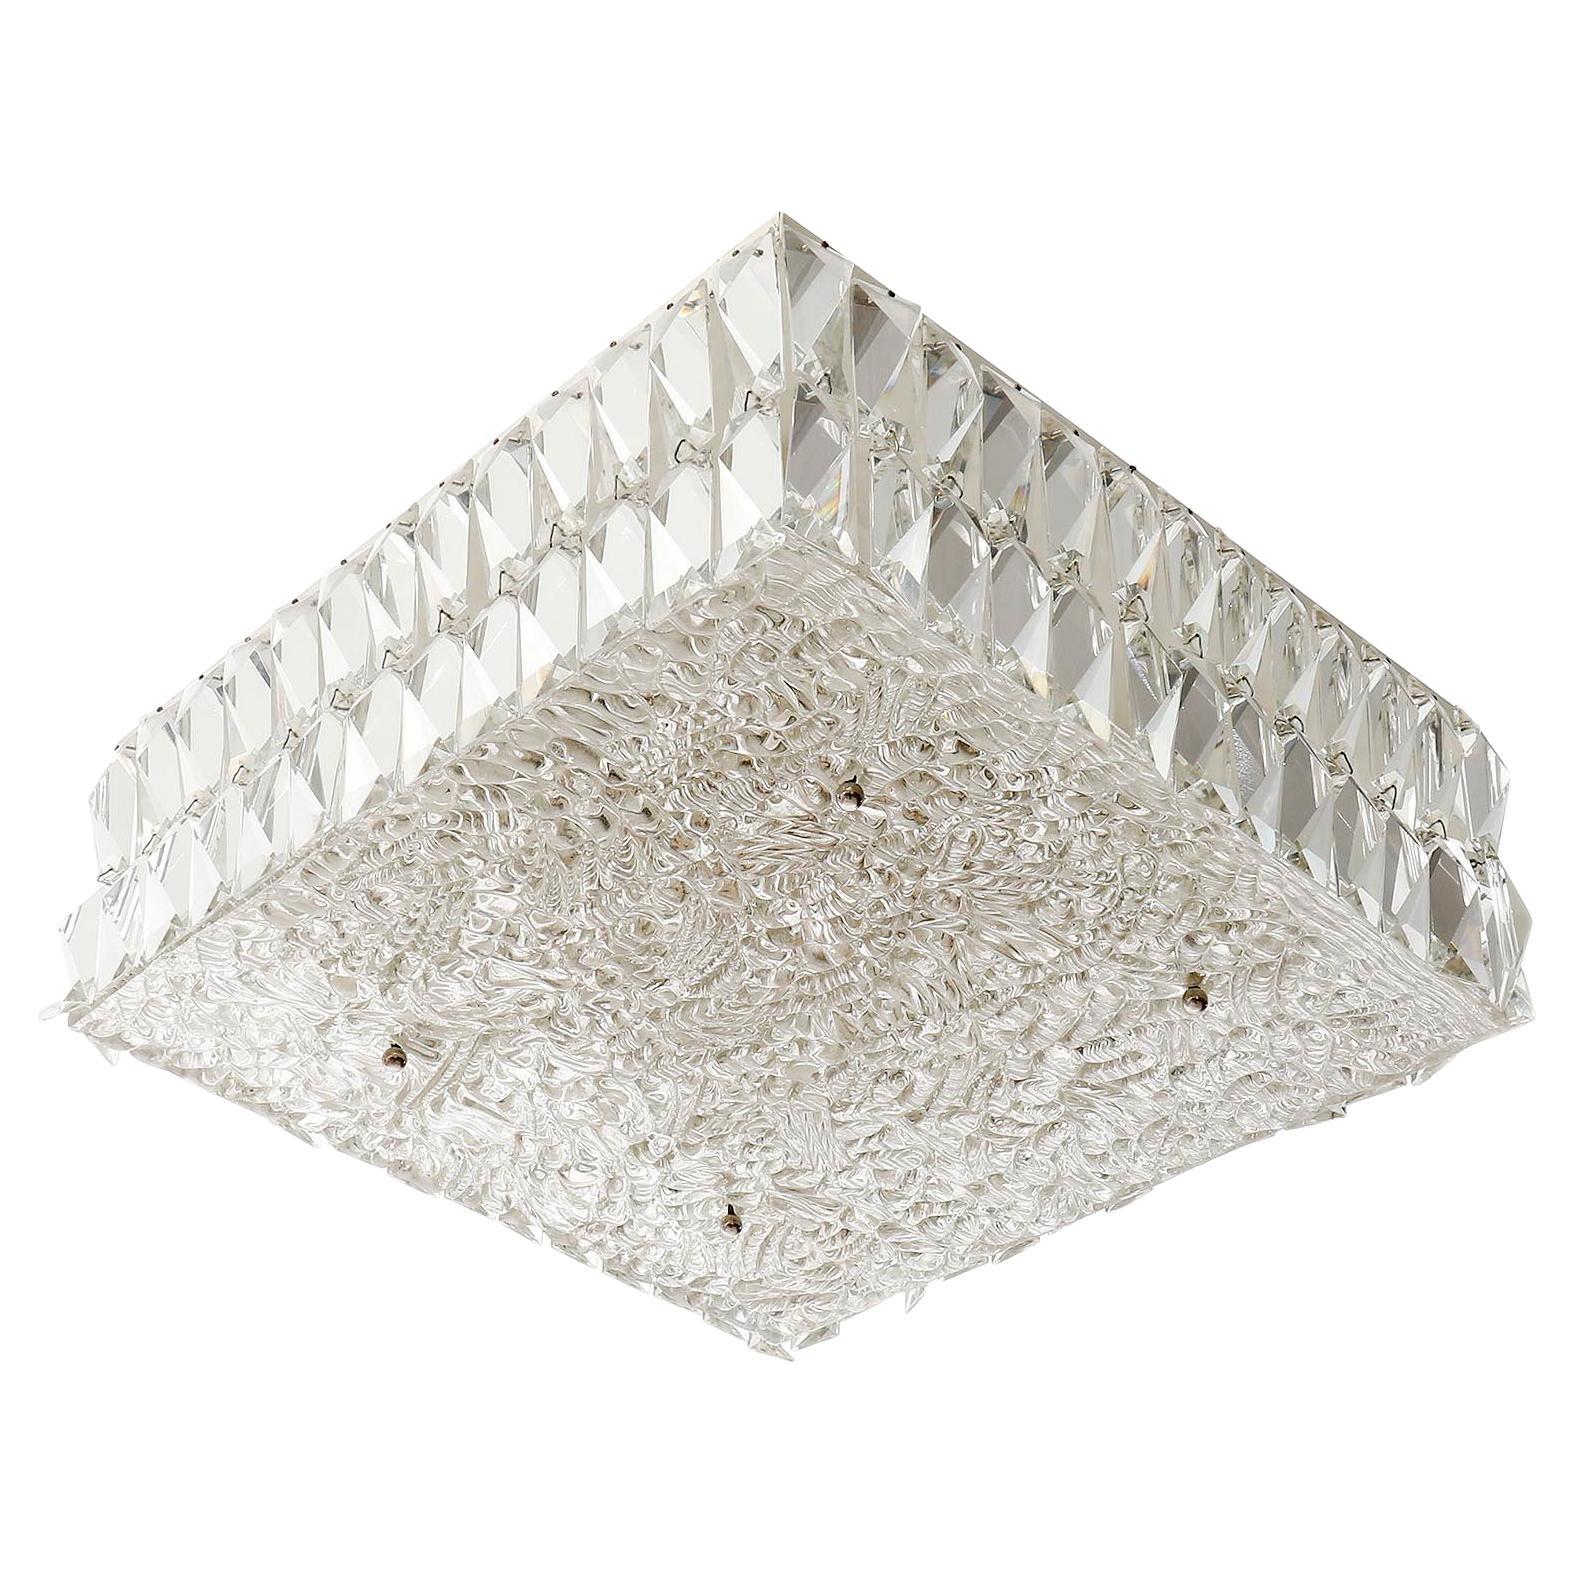 Square Kalmar Flush Mount Light Fixture, Textured and Crystal Glass, 1960s